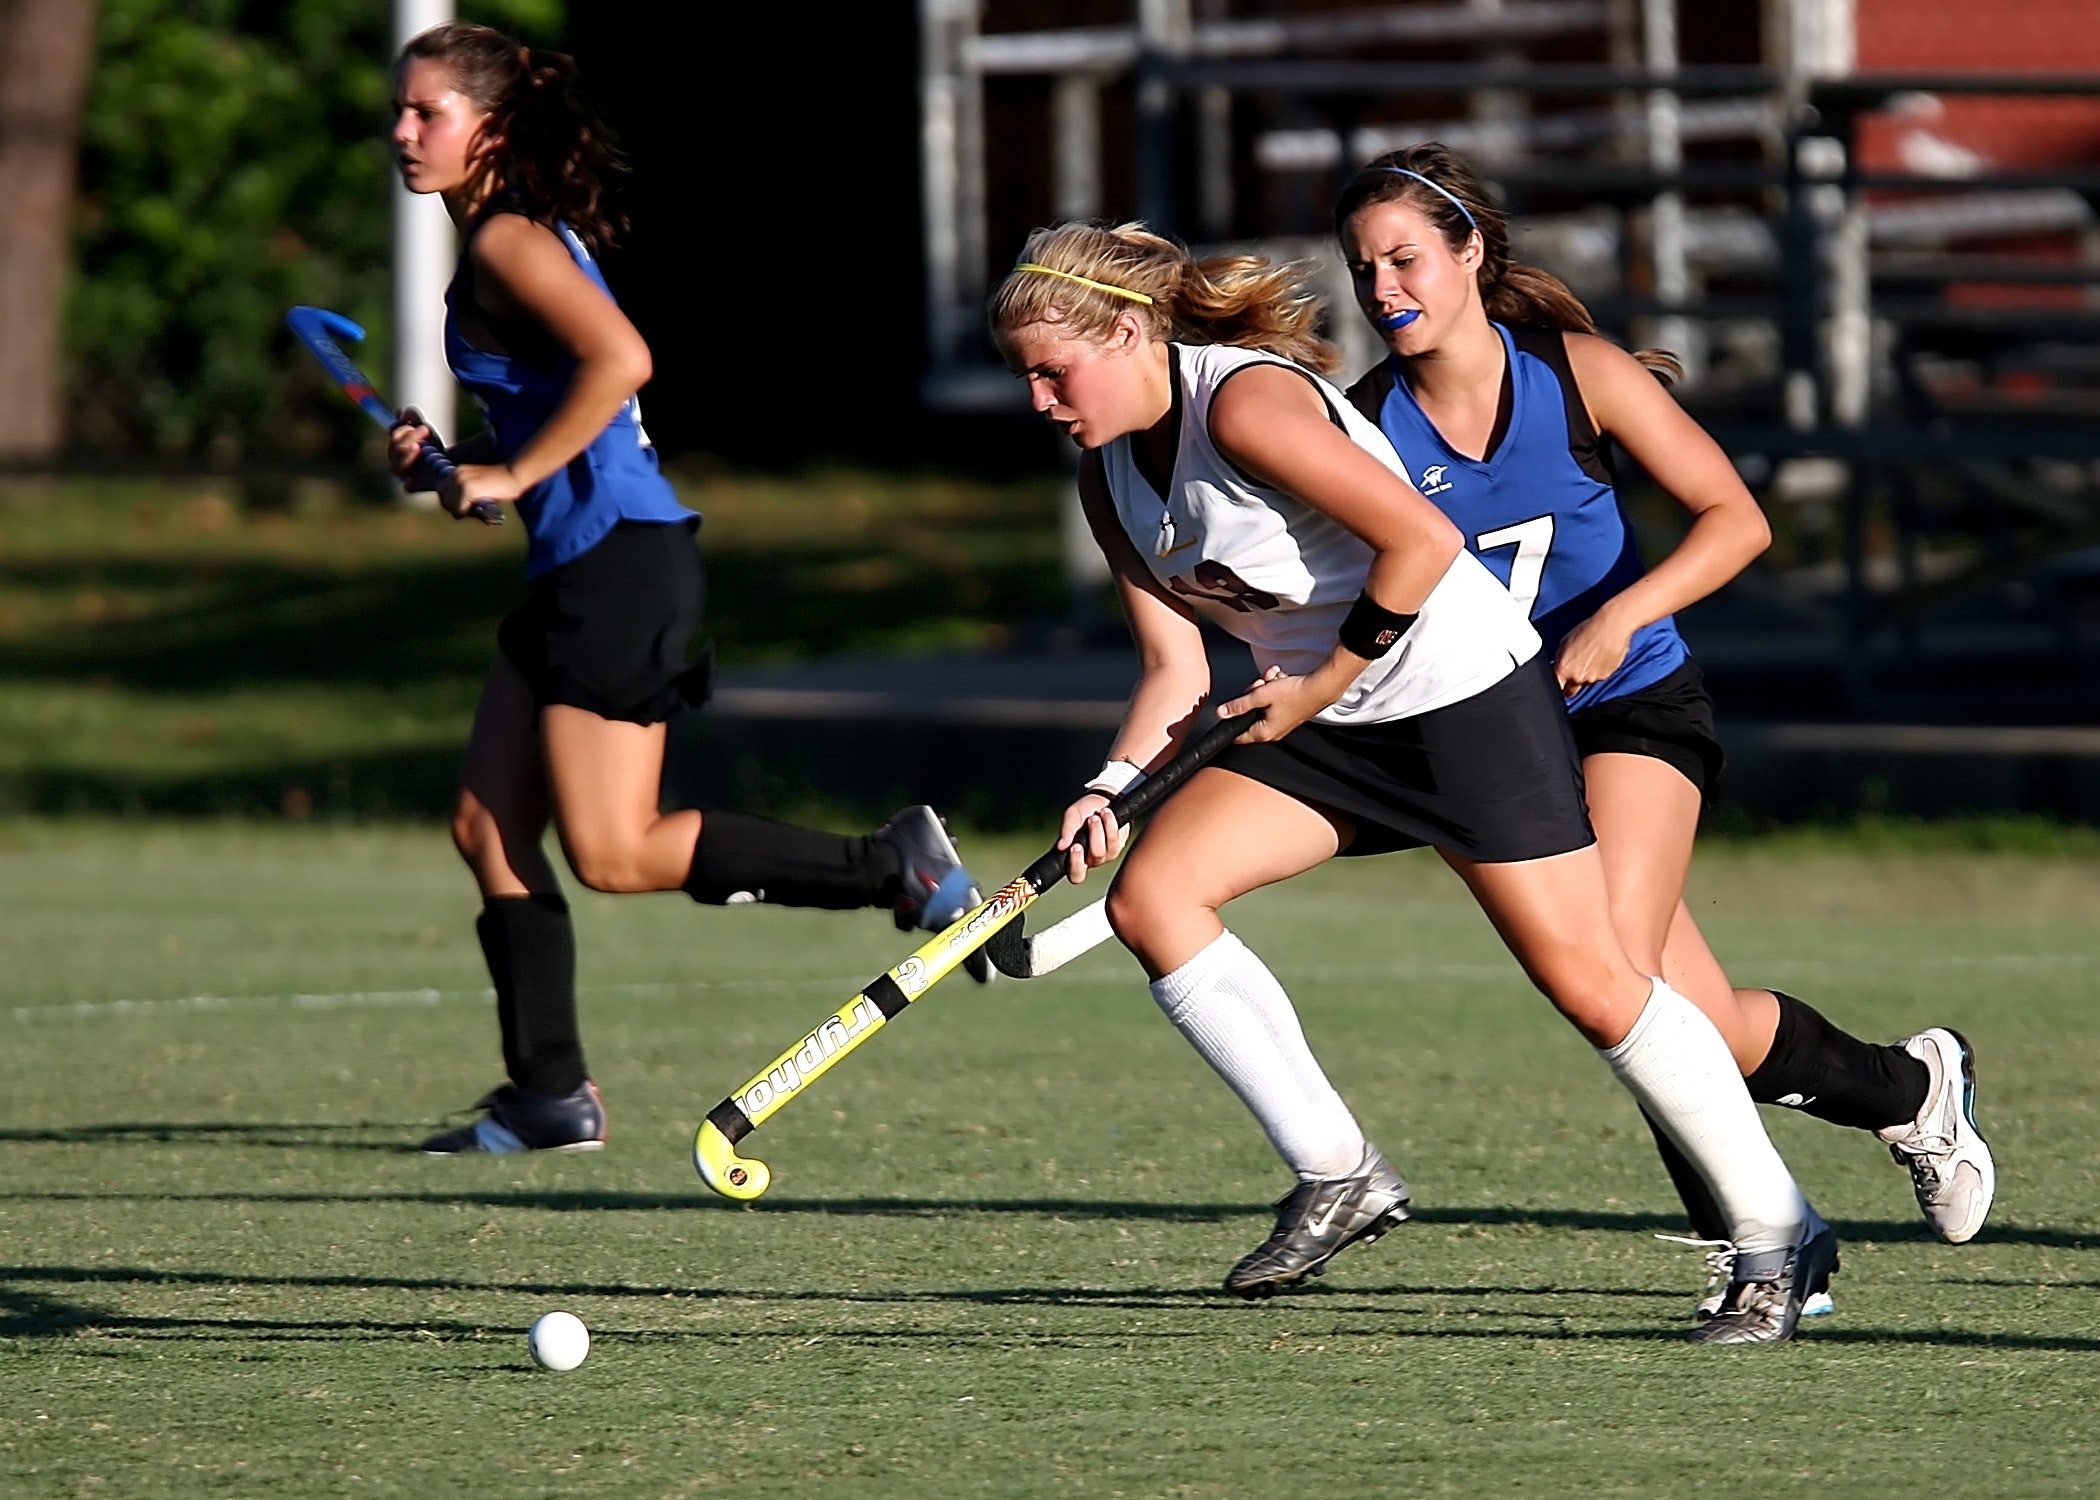 three players going after the ball in a field hockey game